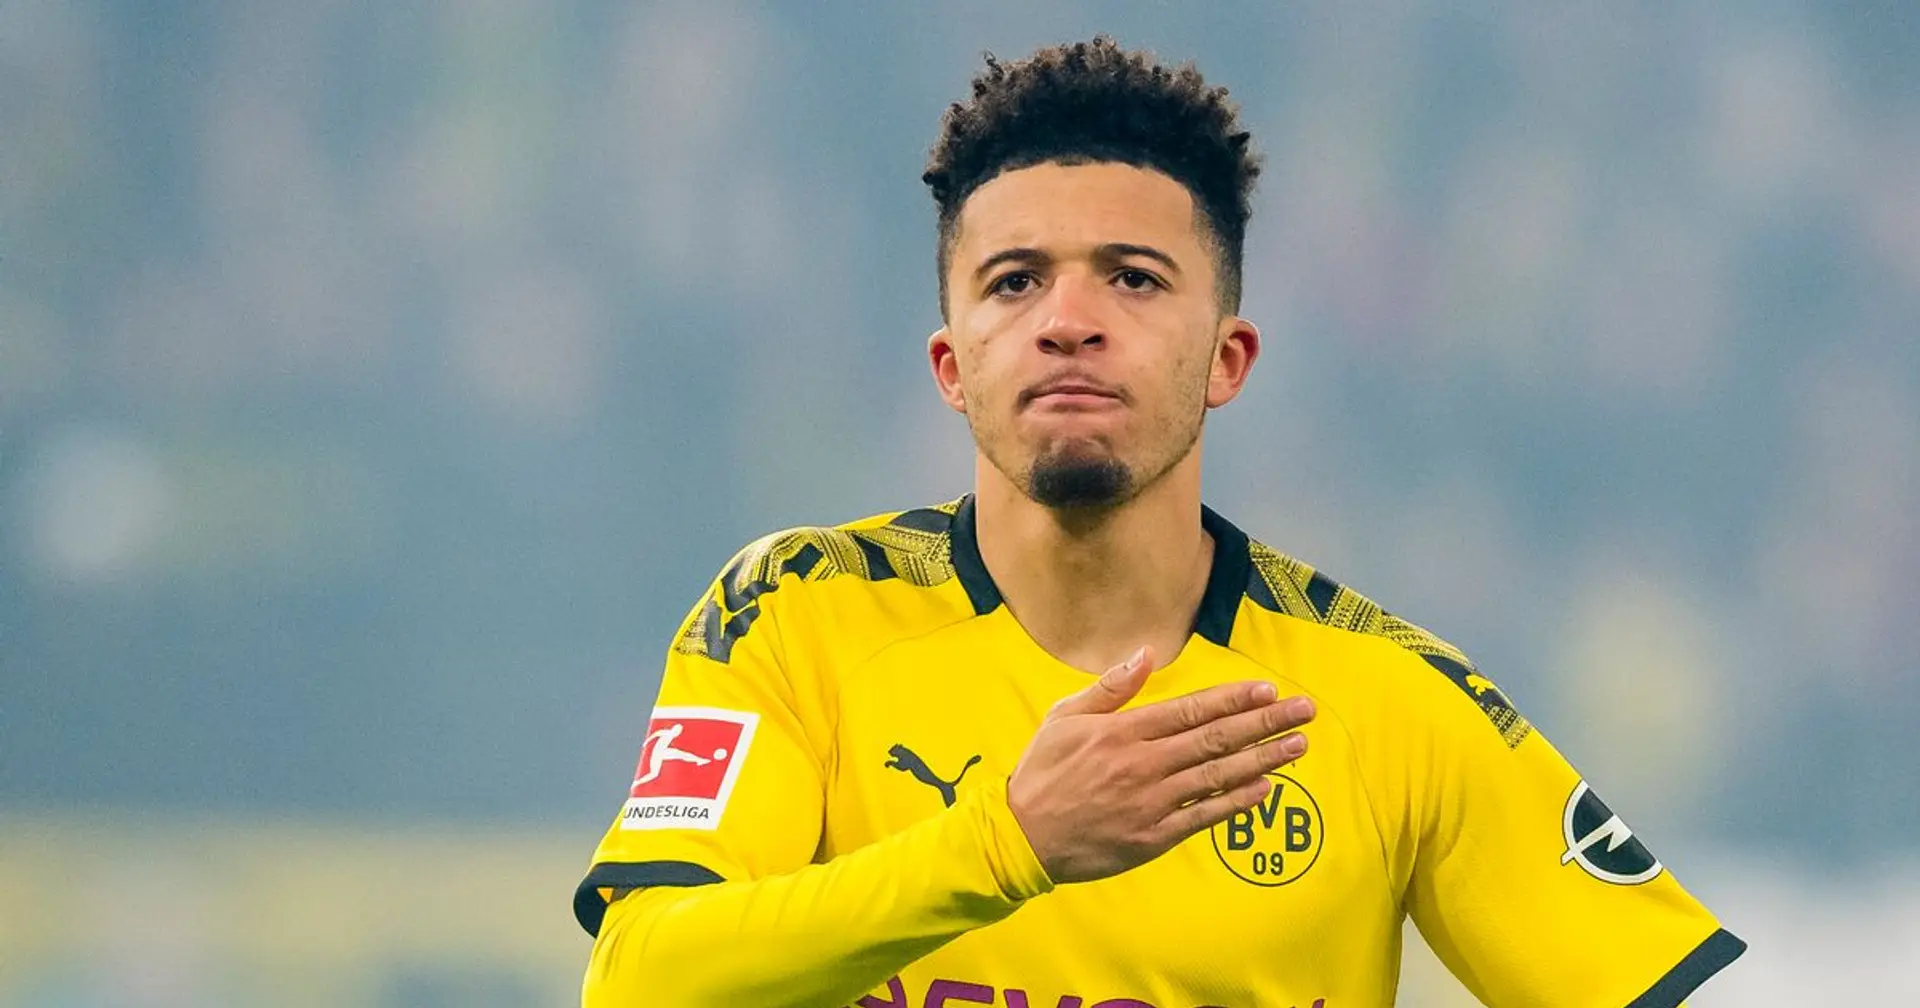 Douglas Costa, Ivan Perisic and more: Who should Man United sign if not Sancho? (video)